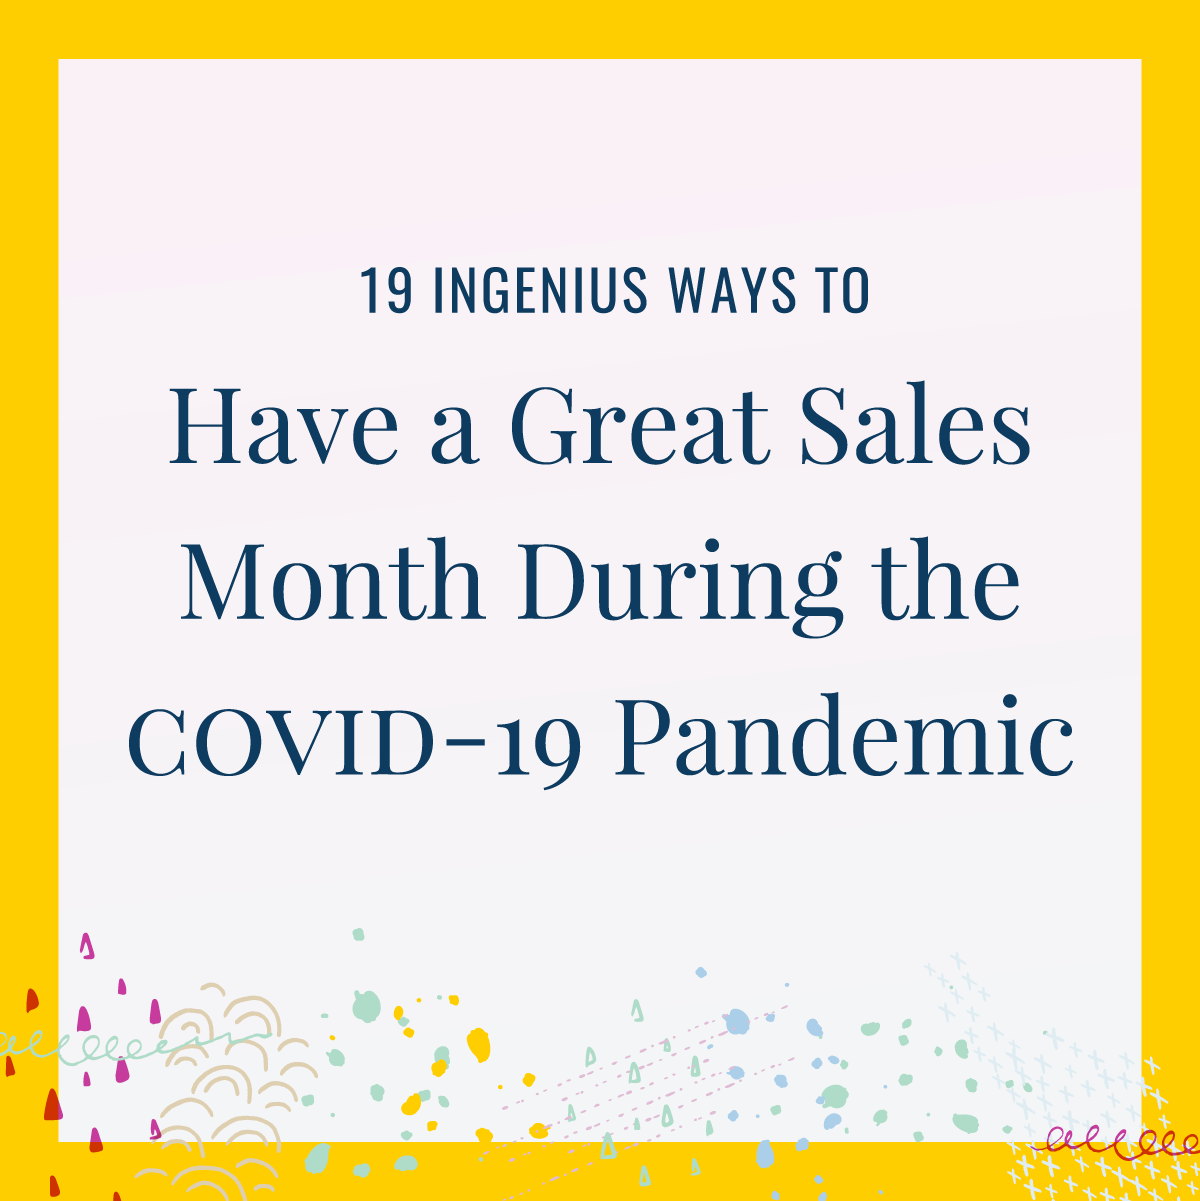 19 ingenius ways to have a great sales month during the covid-19 pandemic